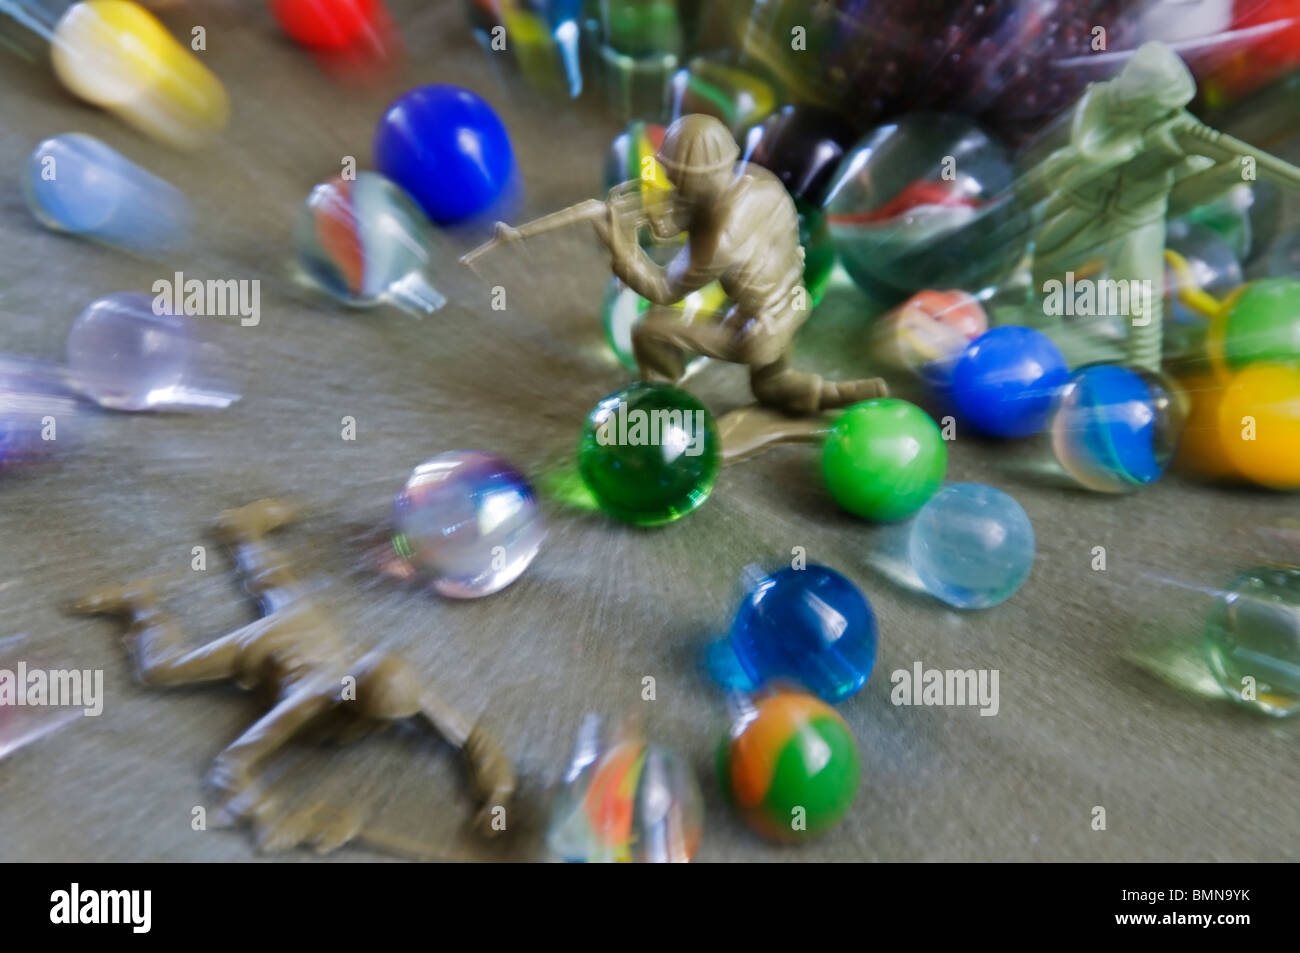 A battle takes place with green plastic action figure toy soldiers and marbles. Stock Photo